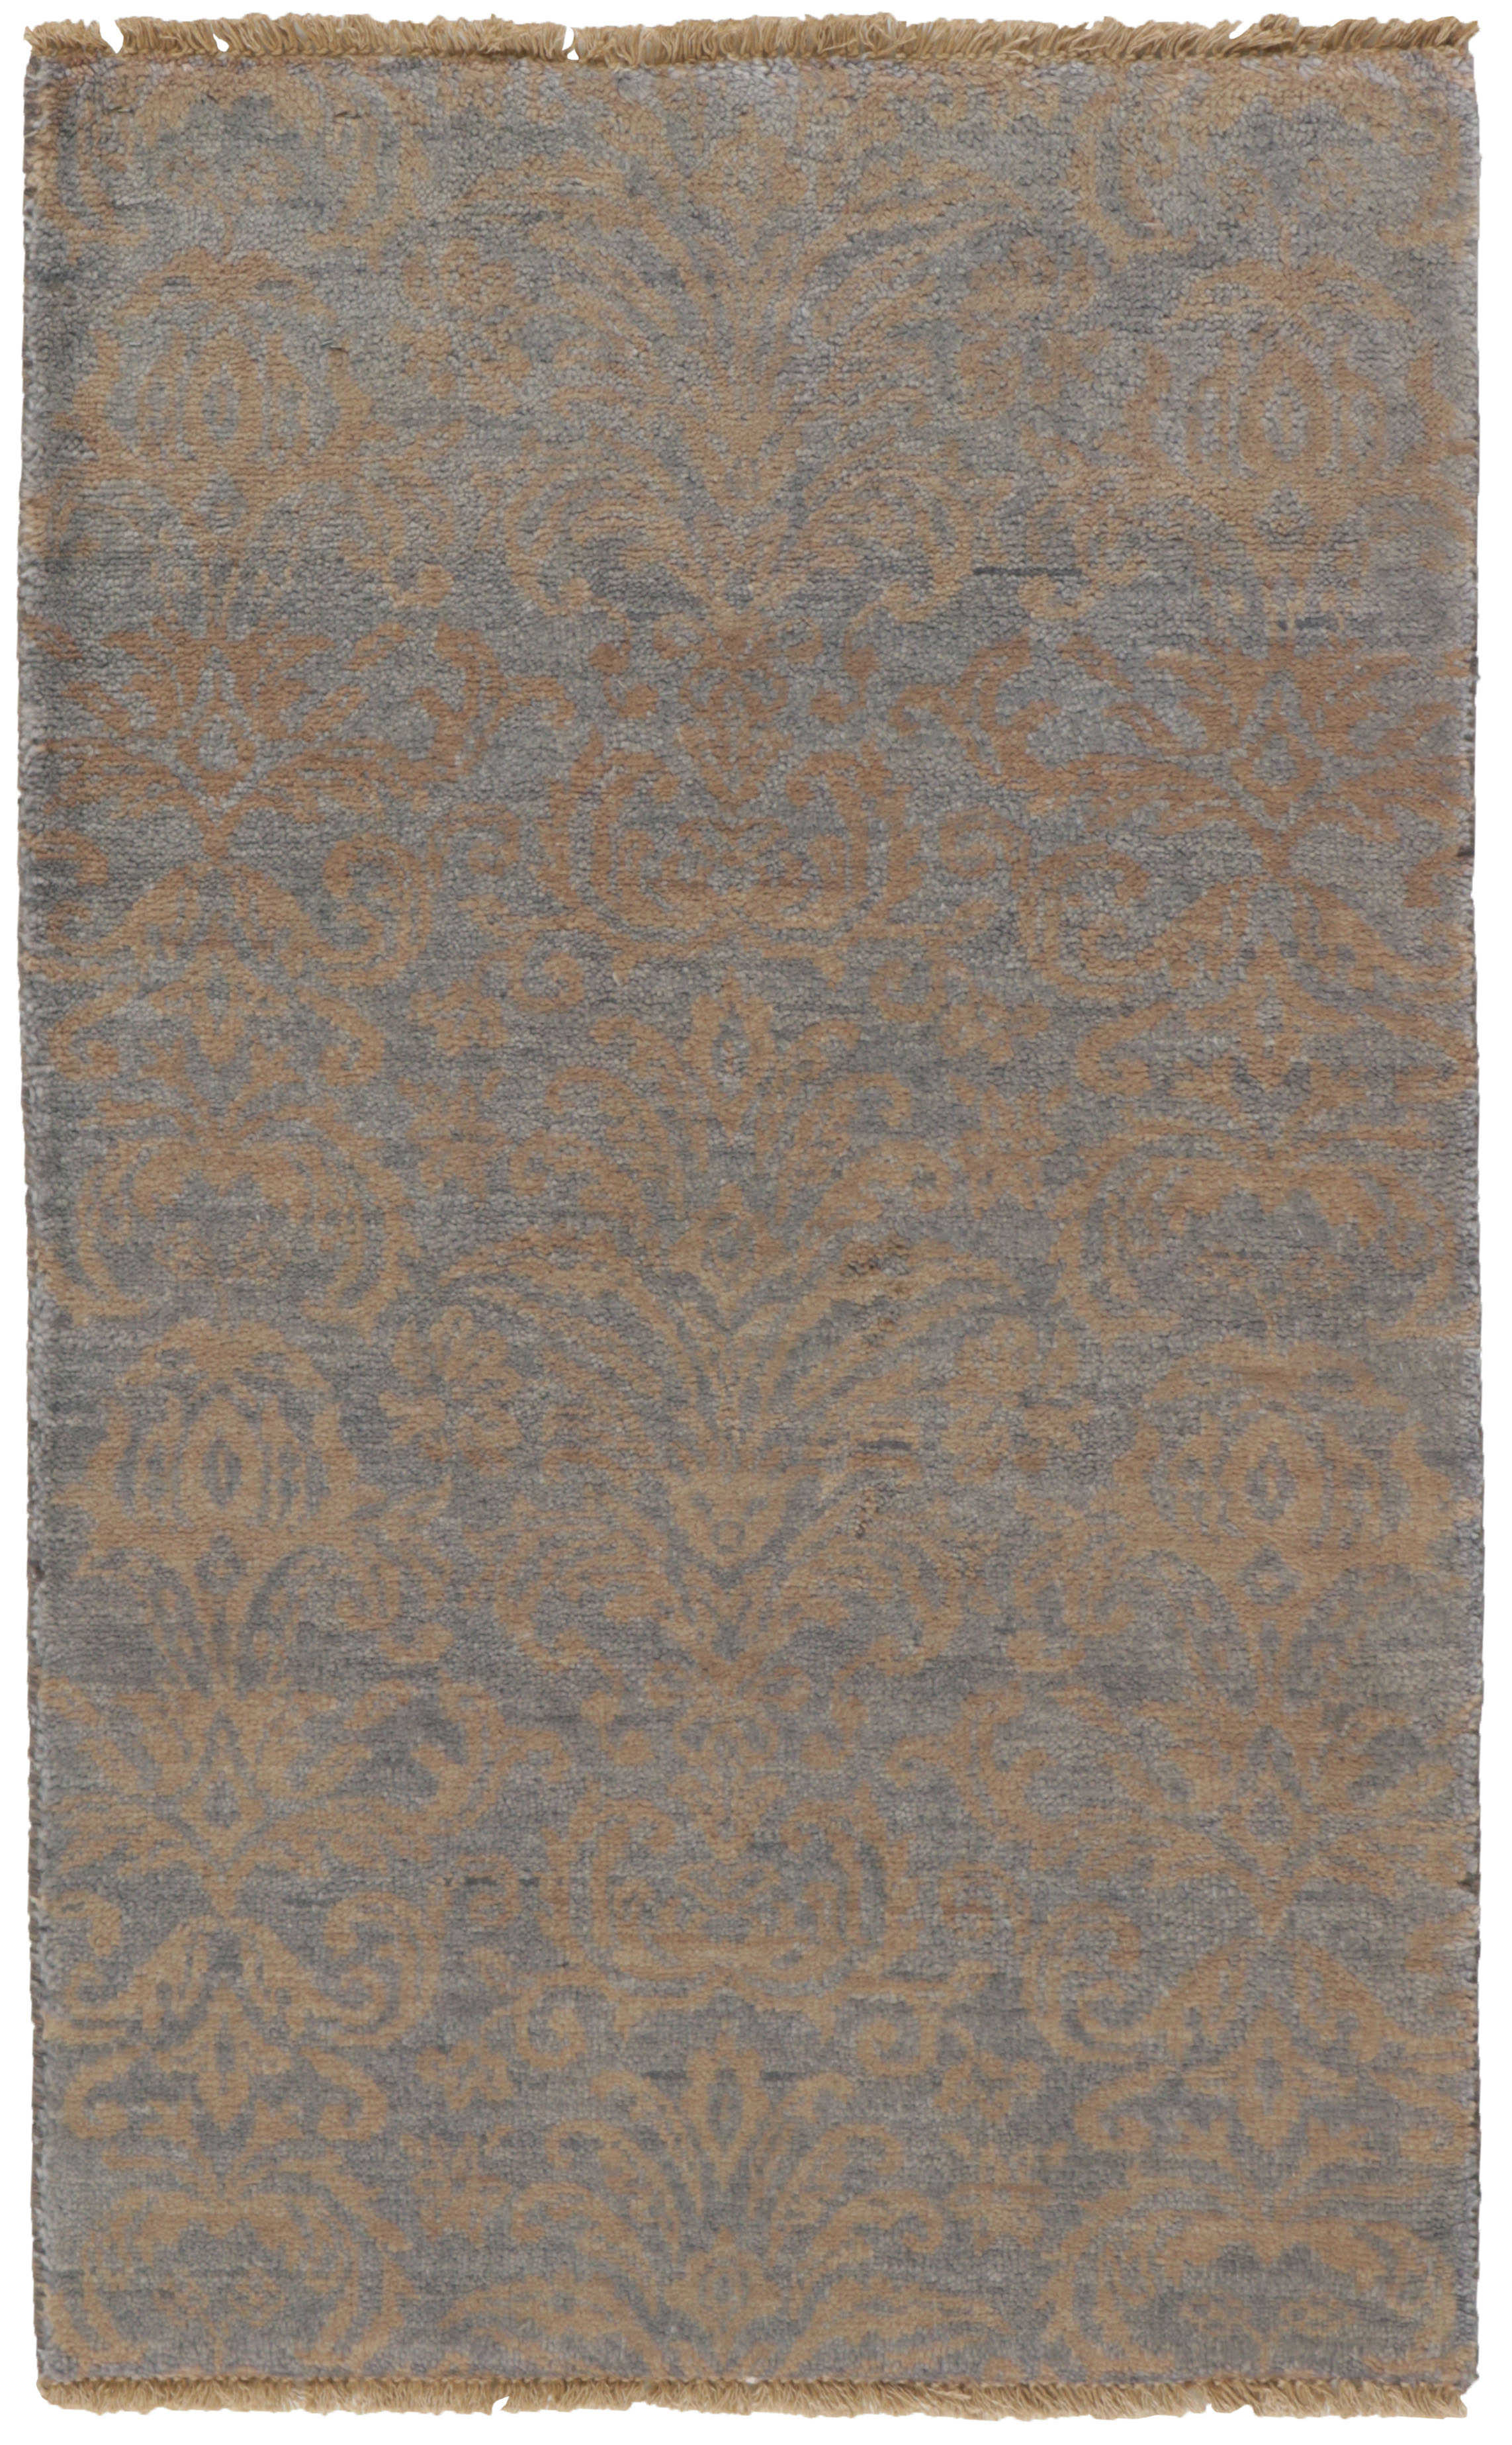 Authentic oriental rug with a damask pattern in black